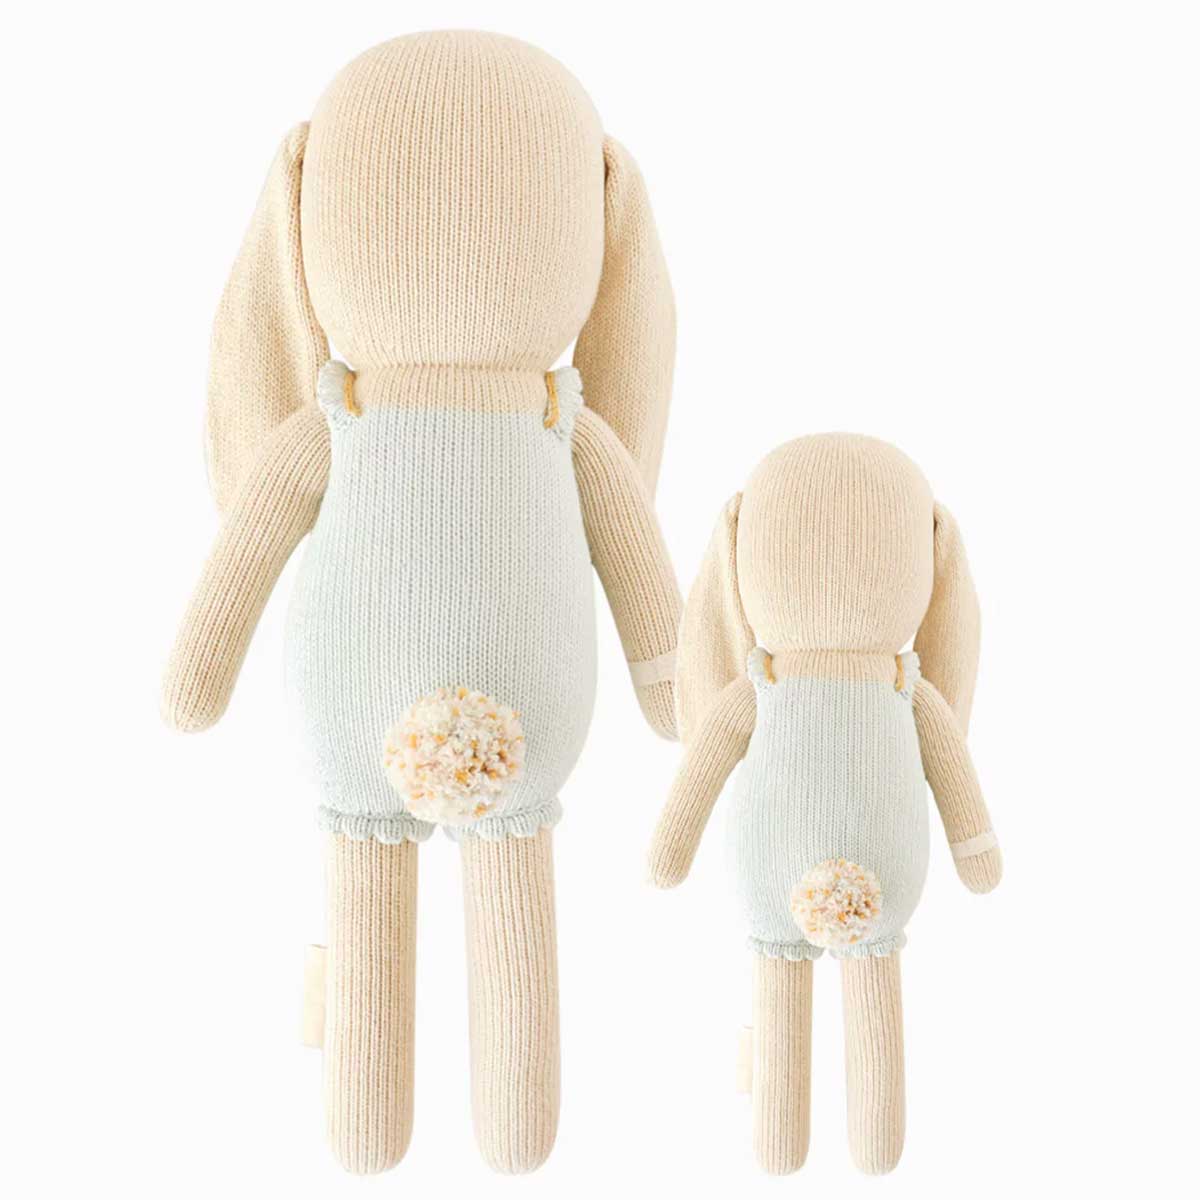 cuddle + kind Hand-Knit Doll Briar the Bunny - Back View